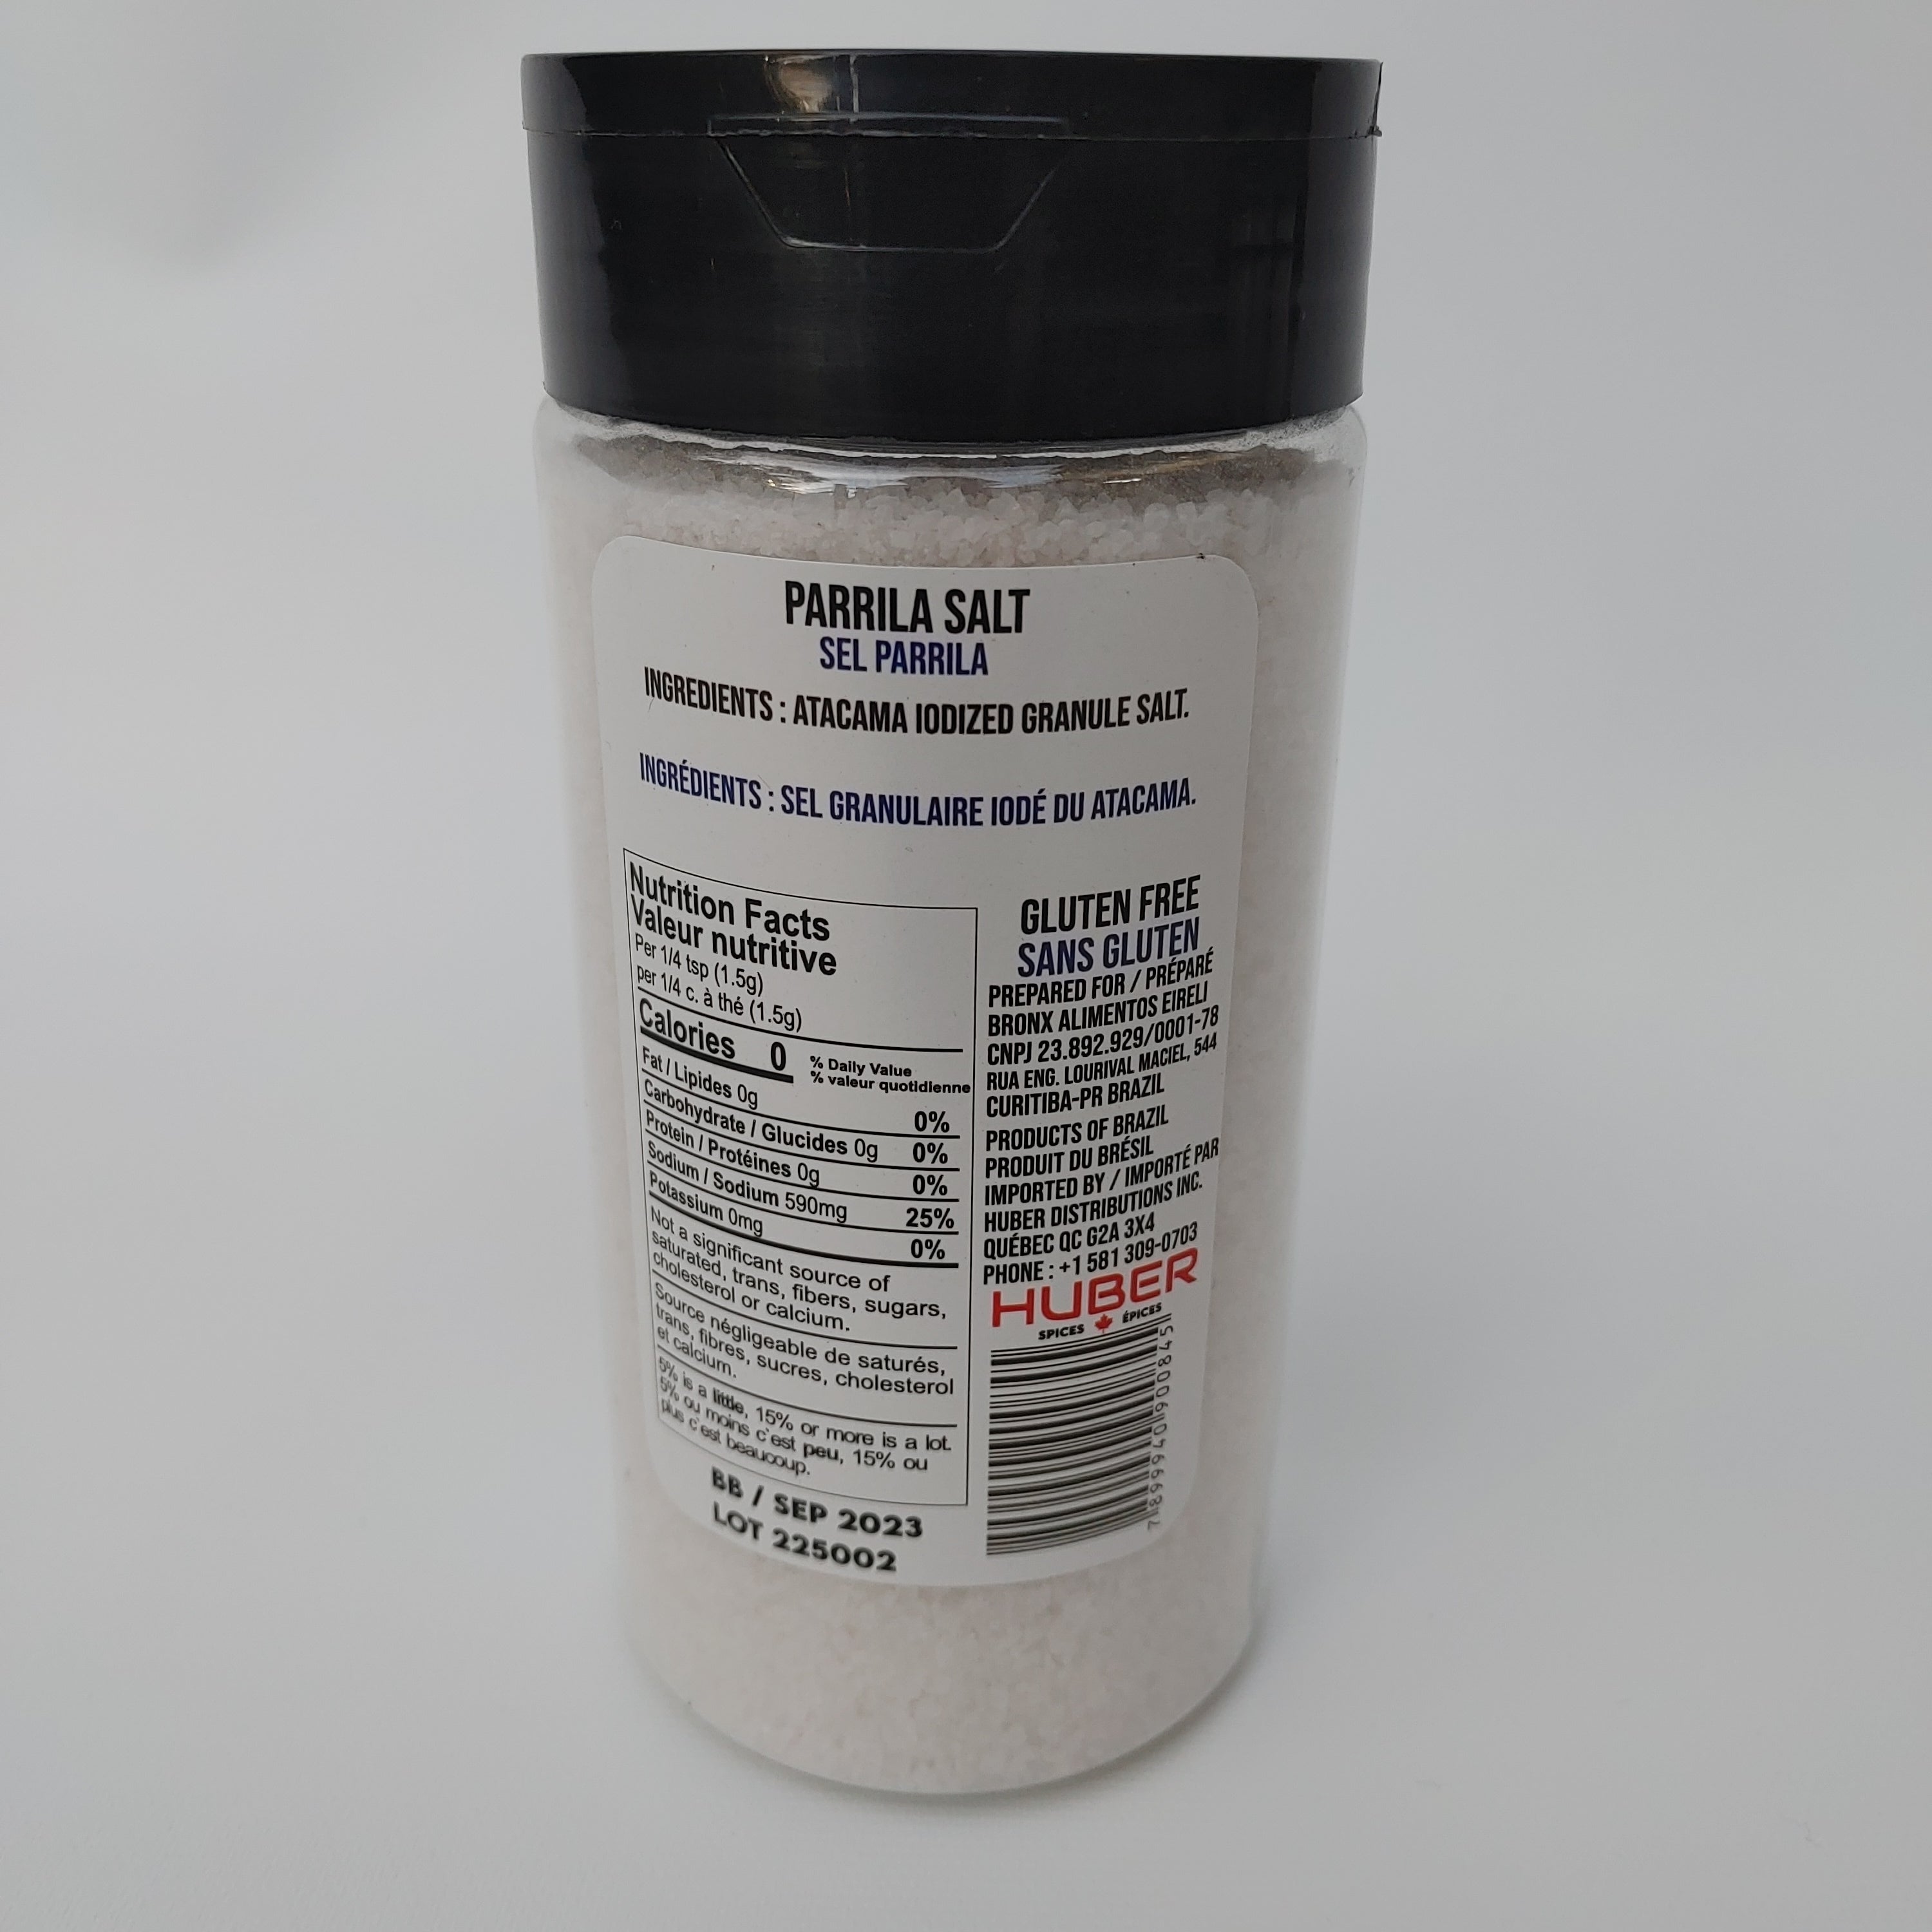 HUBER - Parilla Salt - FINAL SALE - EXPIRED or CLOSE TO EXPIRY